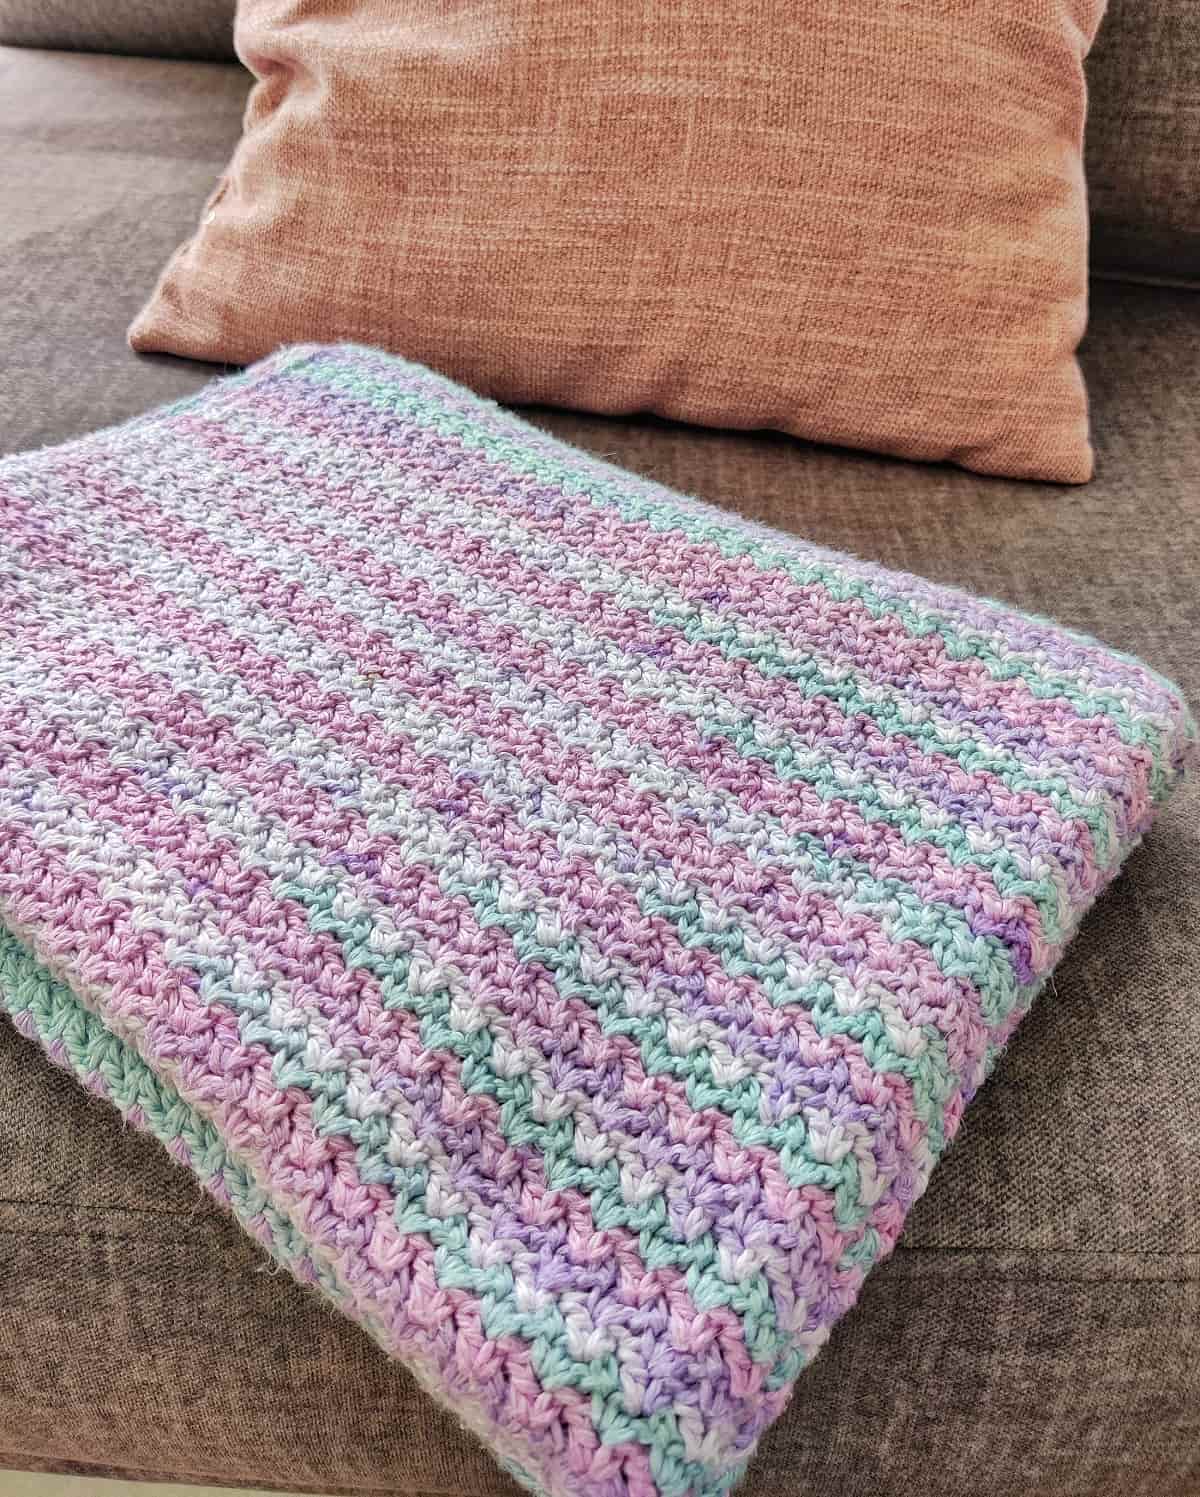 Wattle stitch blanket on a couch